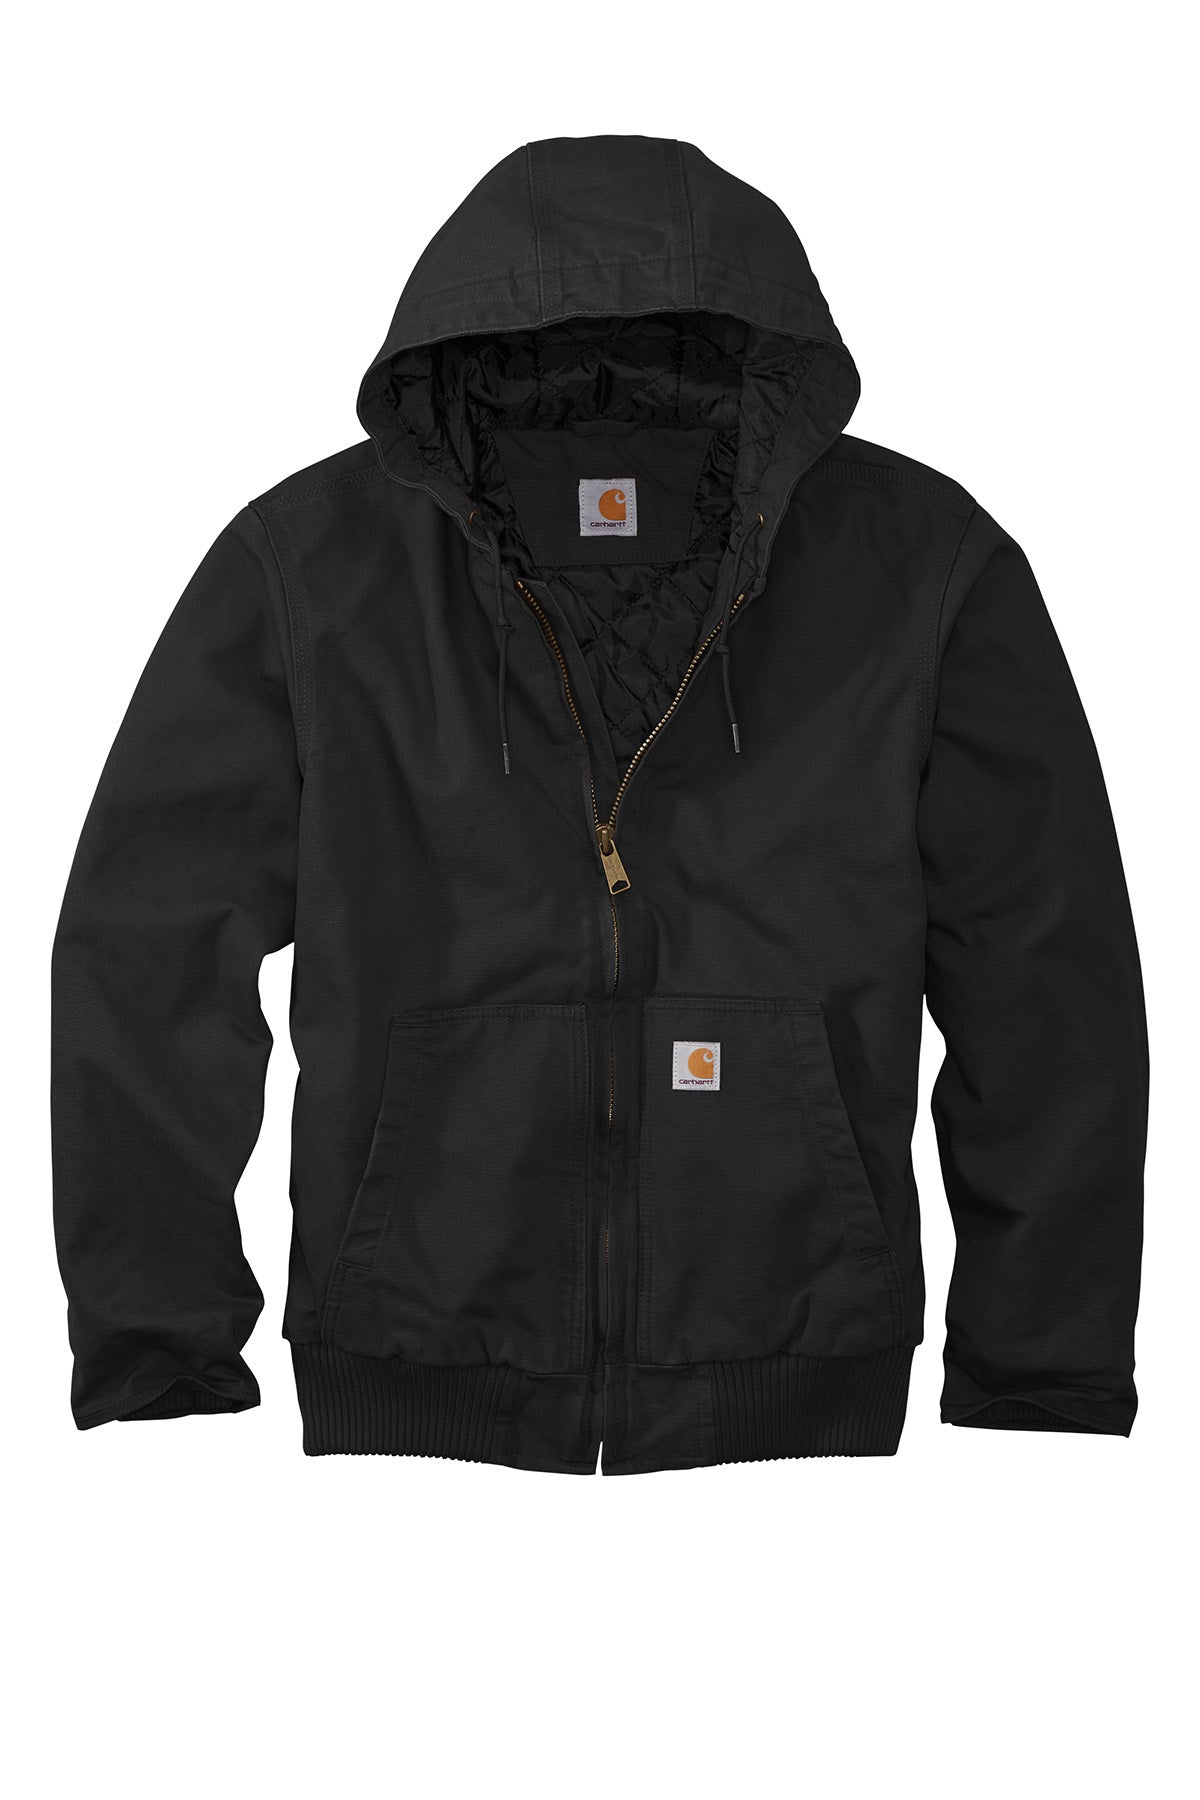 Carhartt® Washed Duck Active Jac – InTandem Promotions